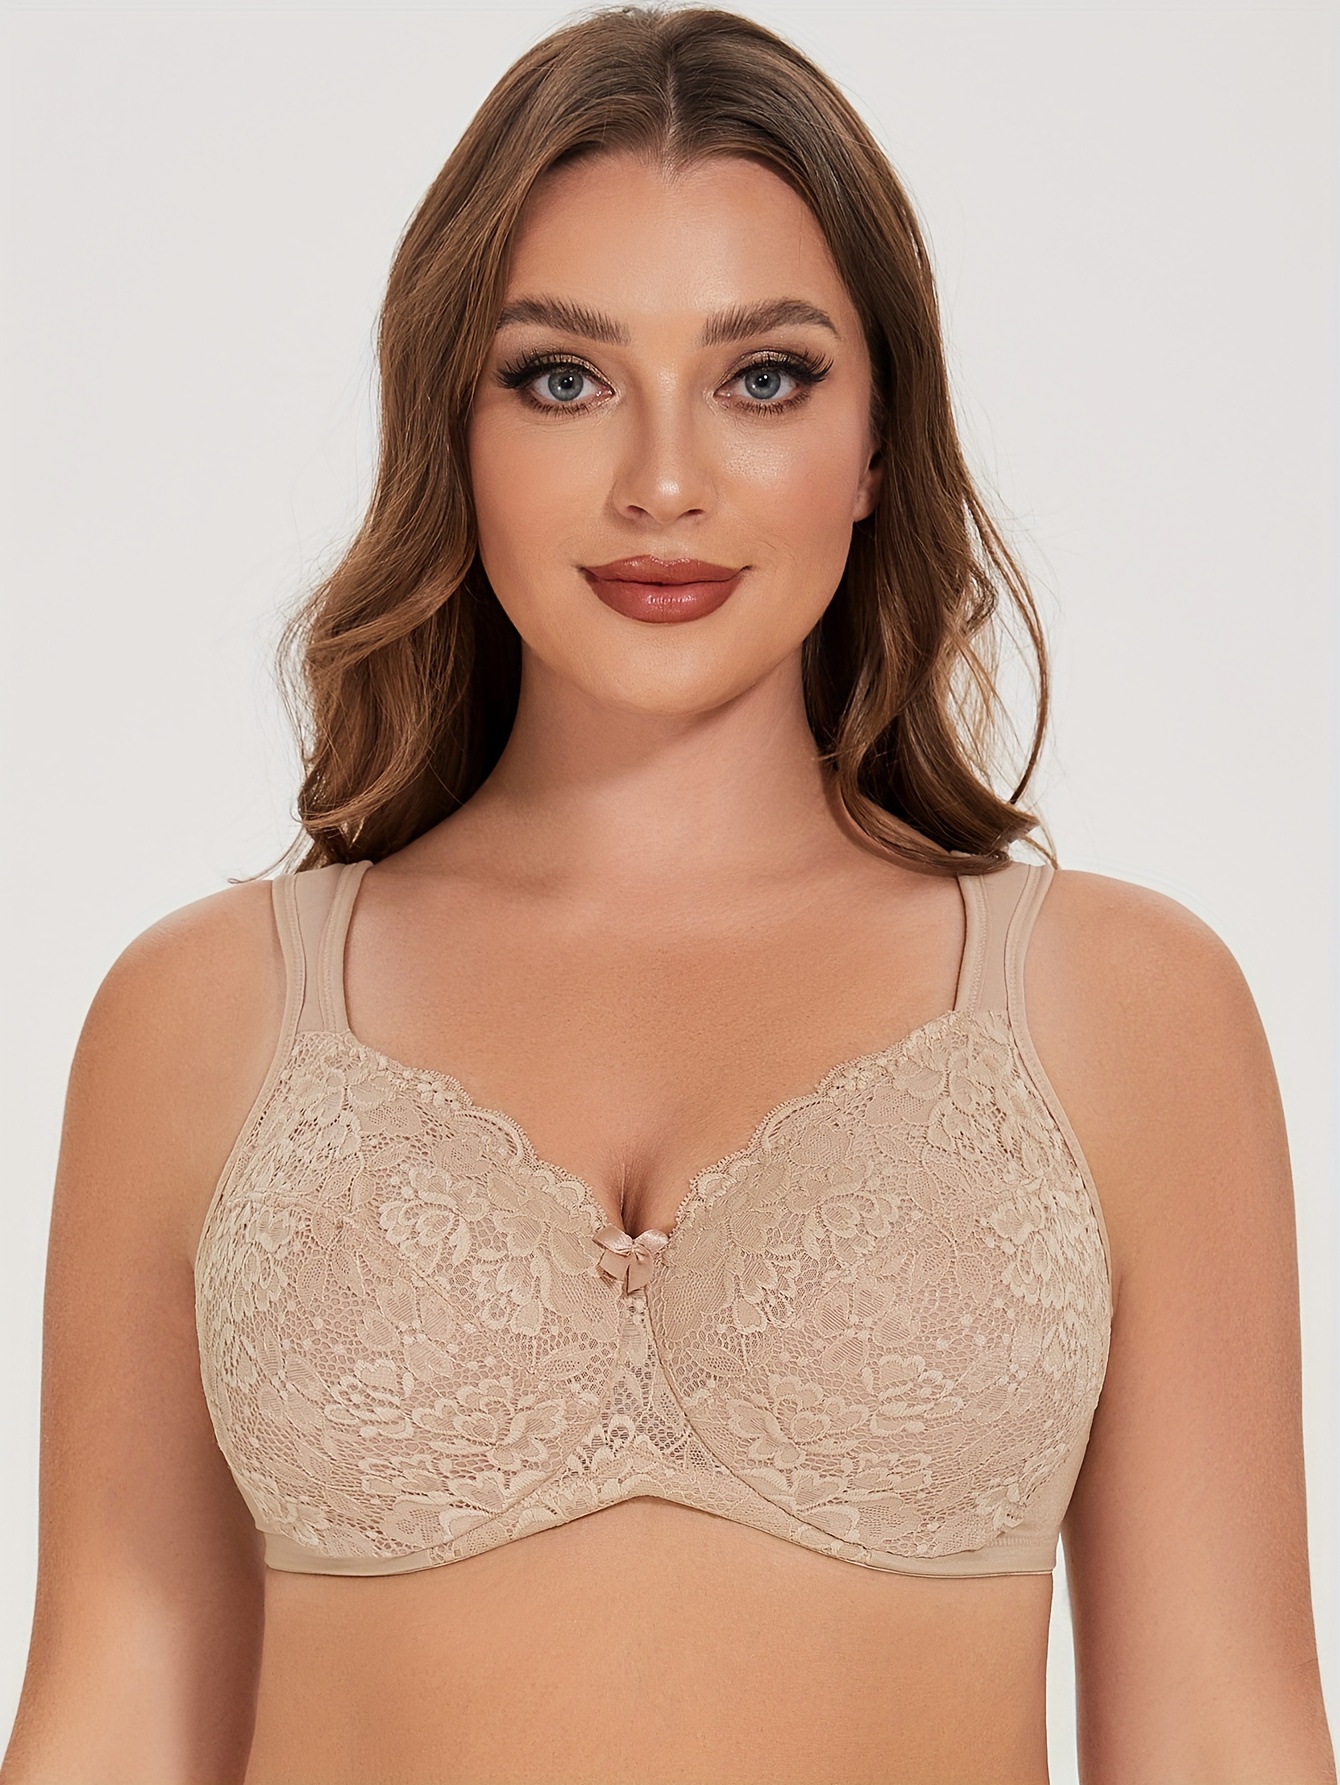 Scarlet Full Cup Embroidery Bra (Size 40/90C), Women's Fashion